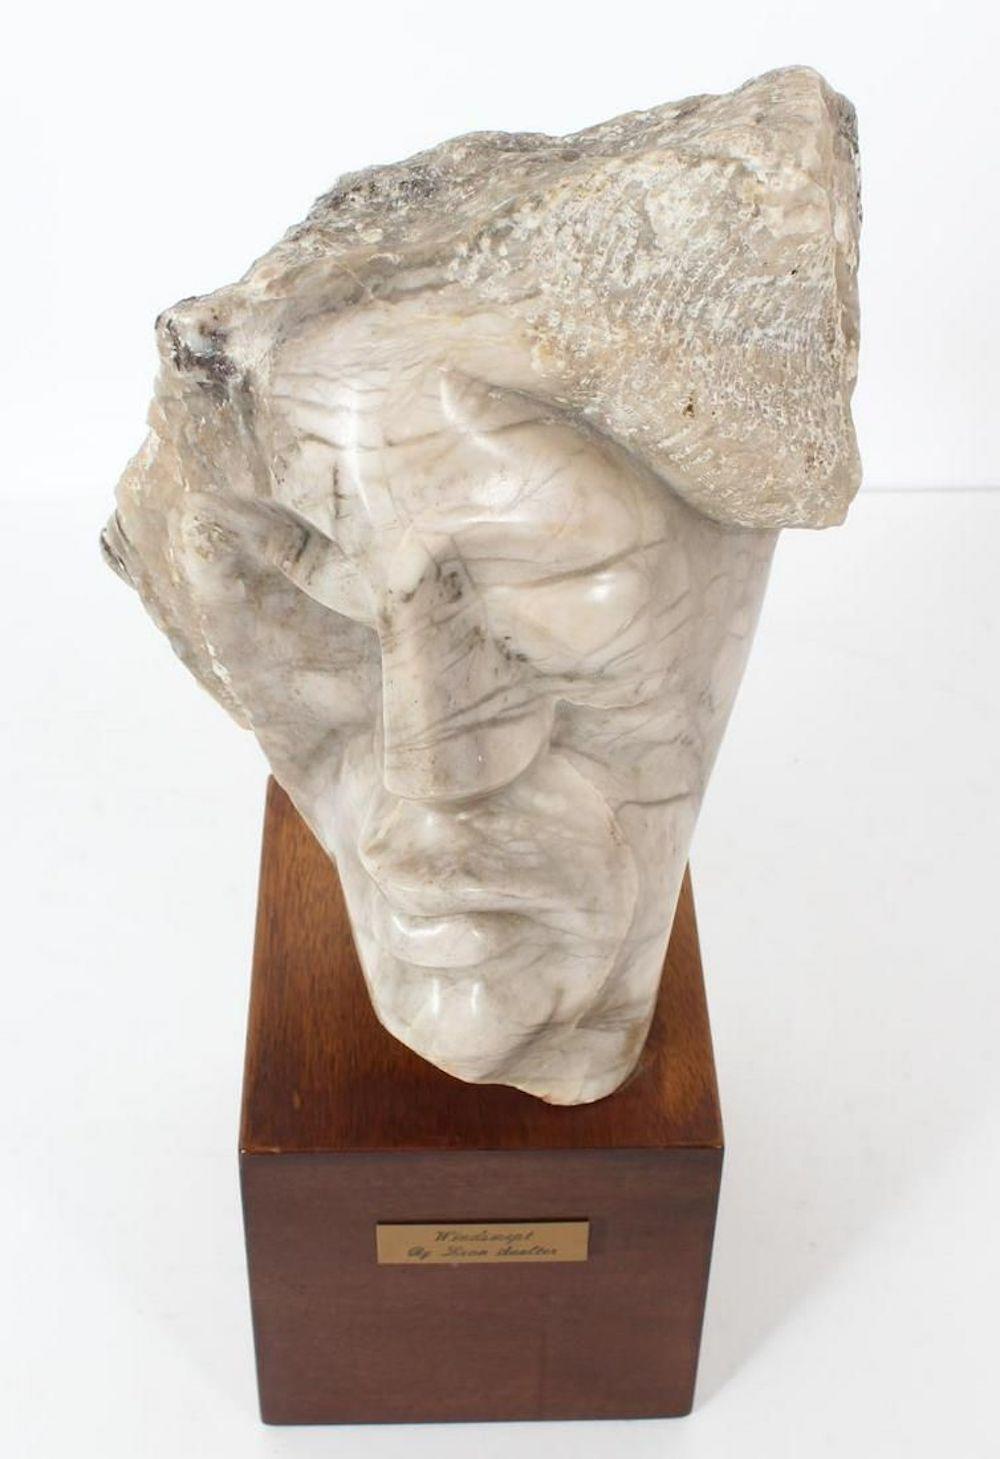 Windswept Marble Sculpture 1975
Signed, on wooden base.
Leon Saulter (1908 - 1986) was active/lived in California  born in Poland. Moved to US in 1921. Leon Saulter is known for sculptures, paintings also writer. 
Born in Poland on March 31, 1908.